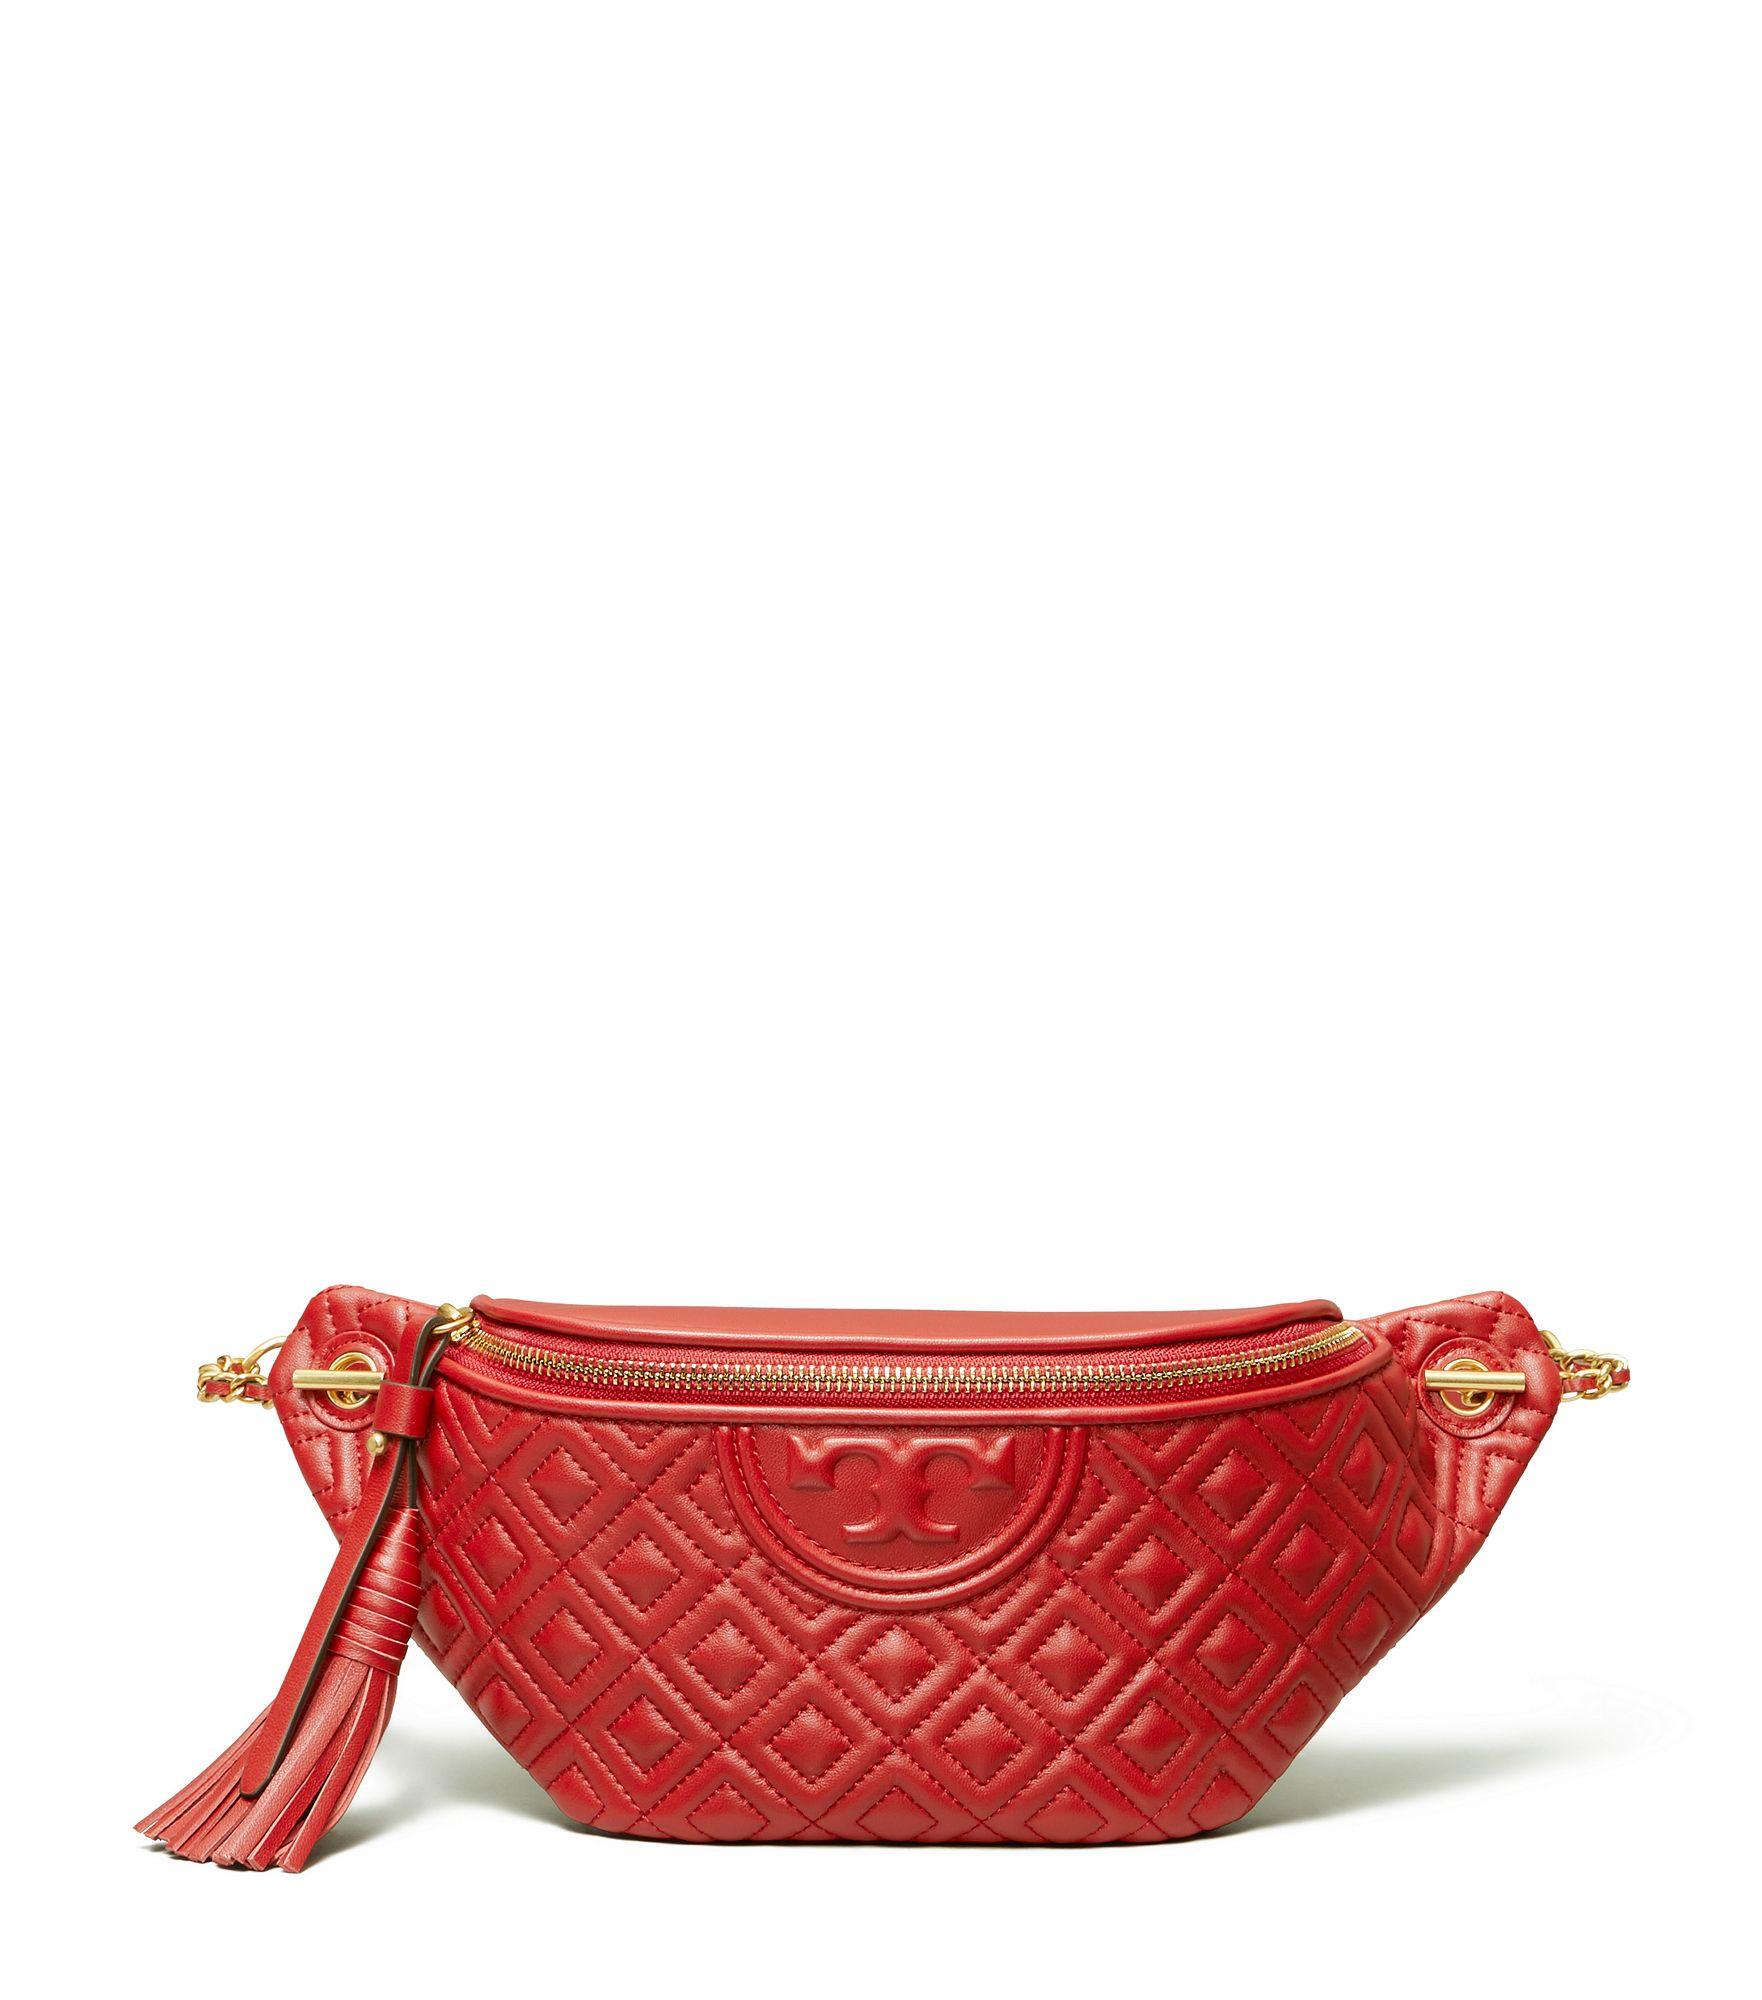 Tory Burch Fanny Pack Red Austria, SAVE 53% 